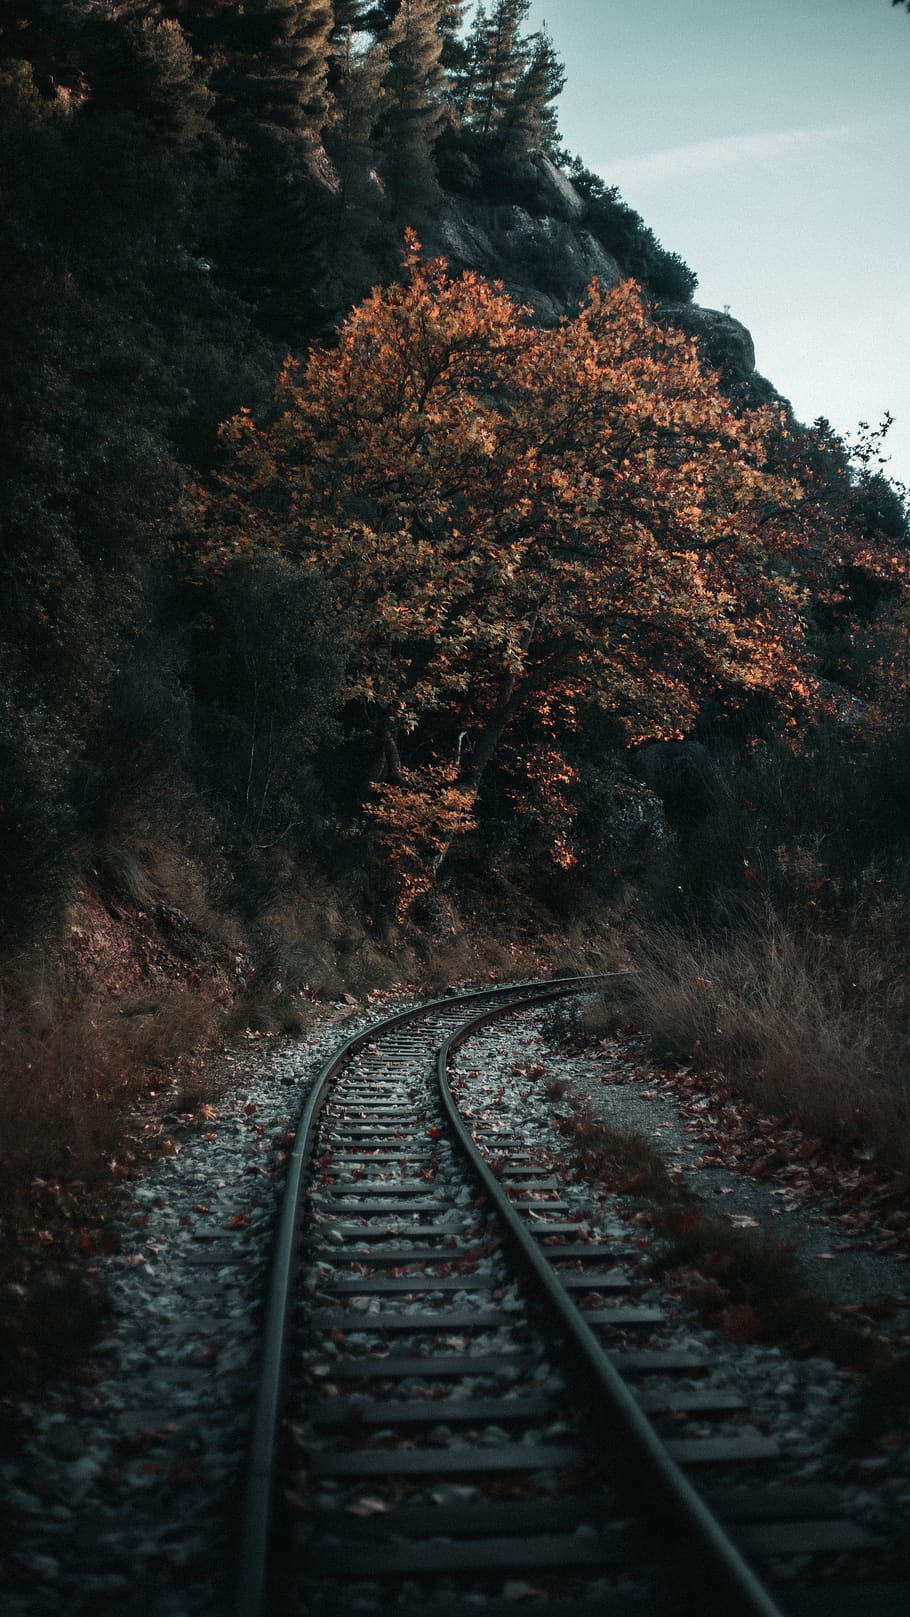 empty train track by tree and mountains, rail, railway, transportation